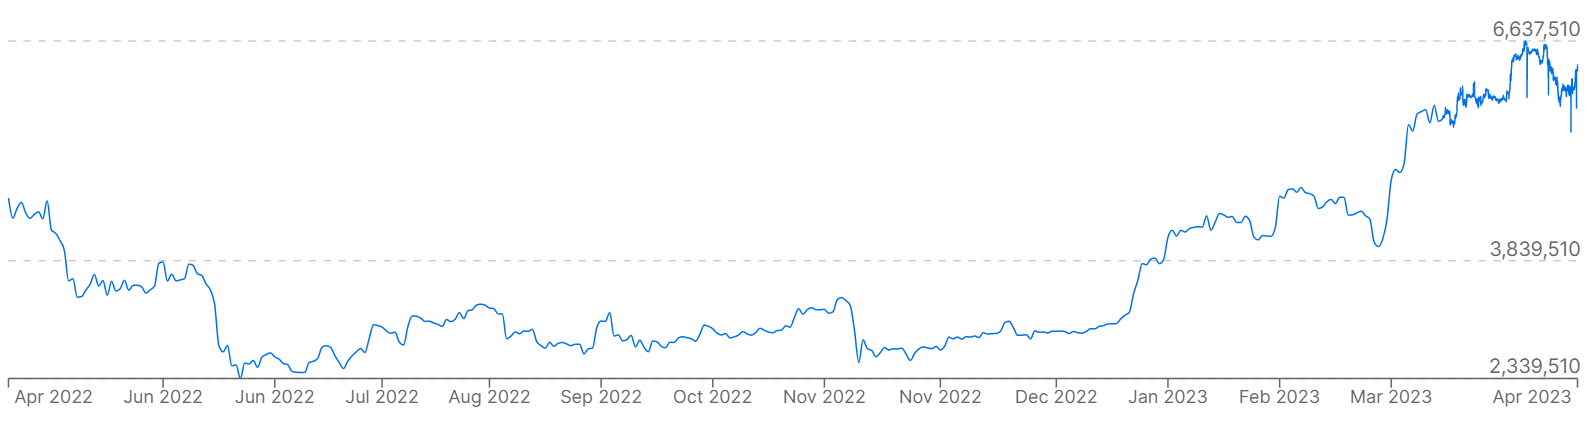 A graph showing Bitcoin prices versus Argentine pesos over the past year.